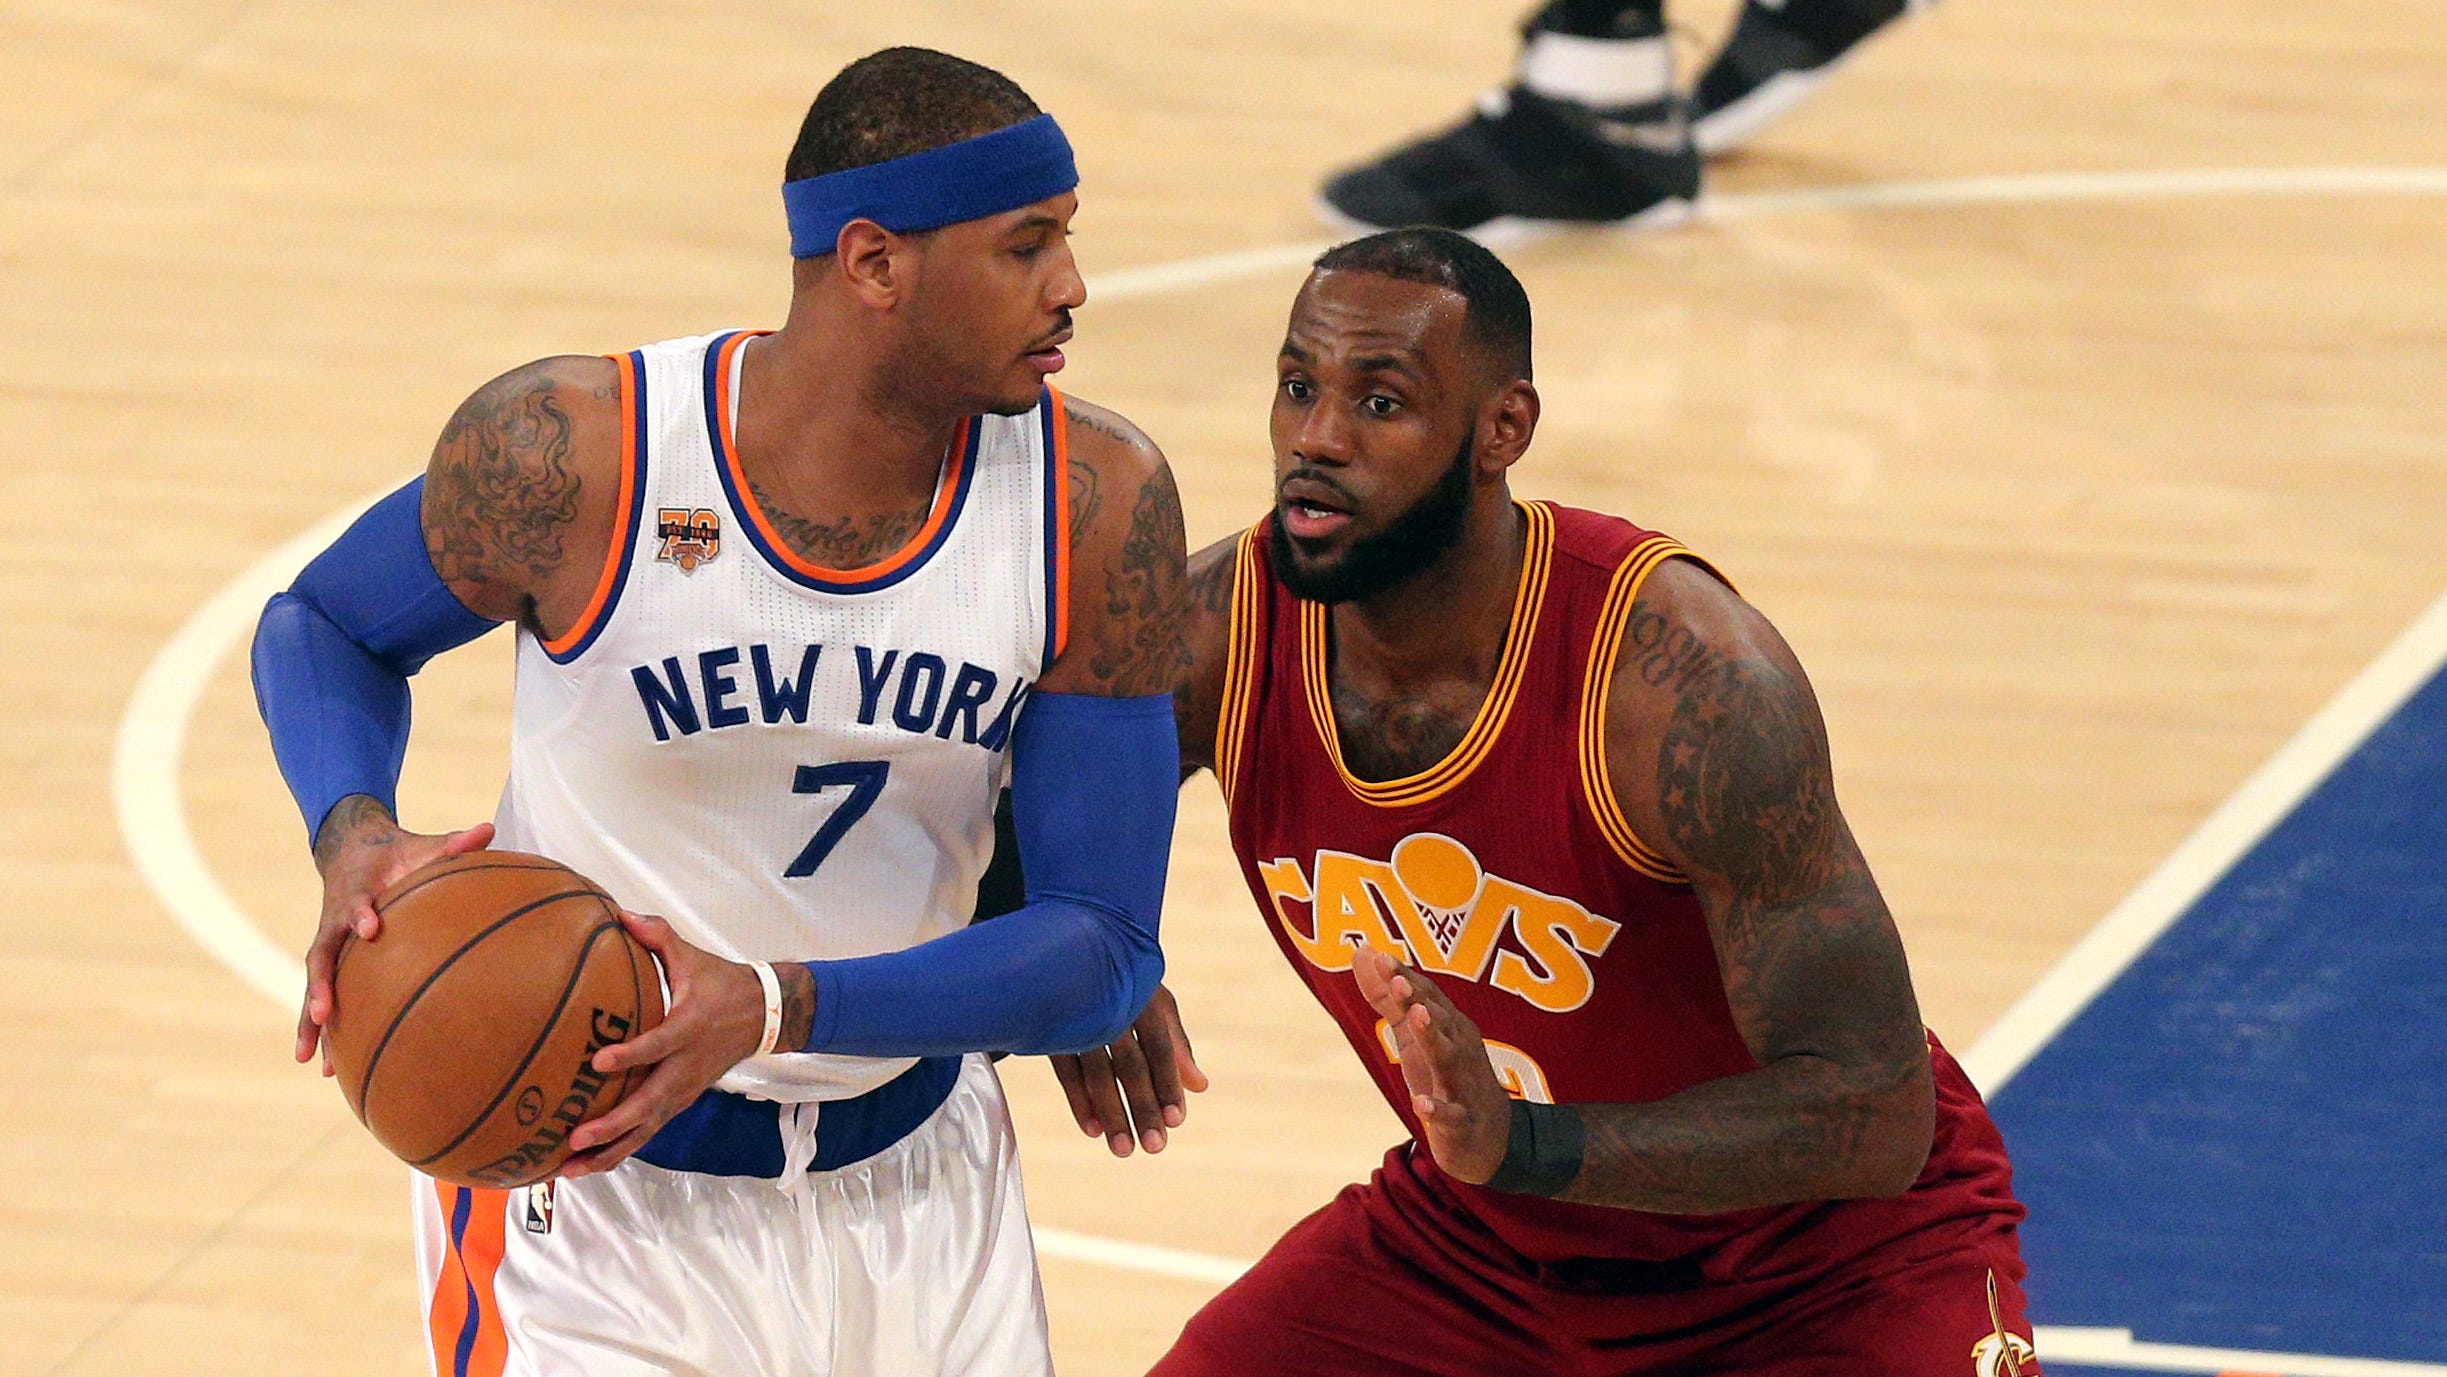 Carmelo Anthony of the New York Knicks looks to make a move on LeBron James of the Cleveland Cavaliers in a 2016 game. Anthony was selected third overall in the 2003 NBA draft, two spots behind James.